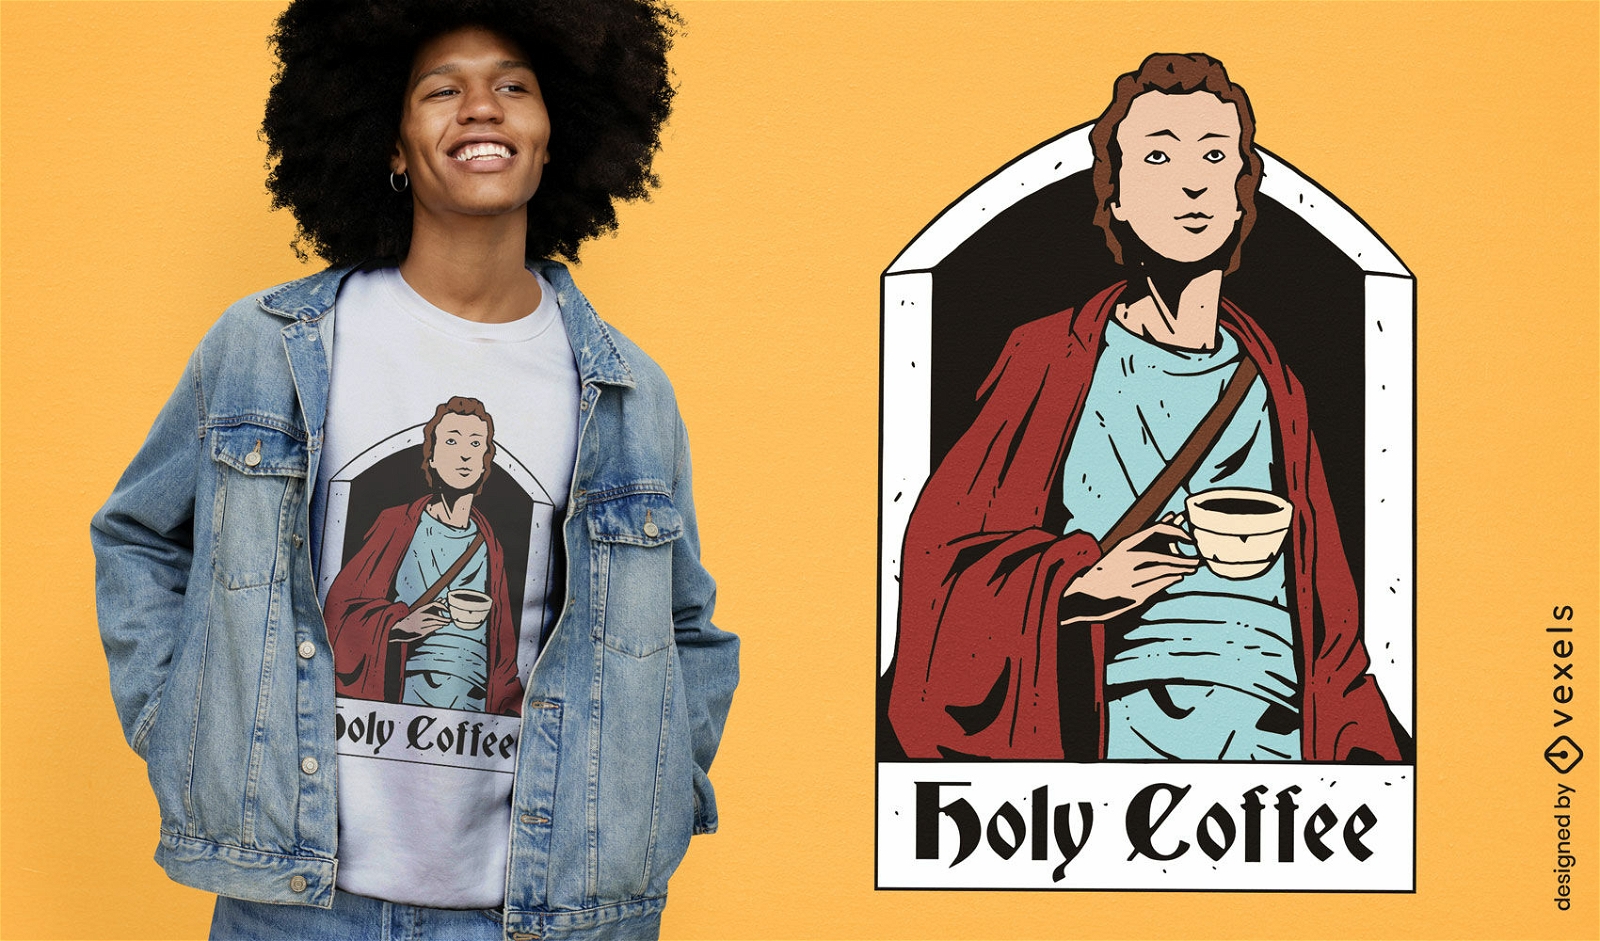 Holy coffee funny religion quote t-shirt design